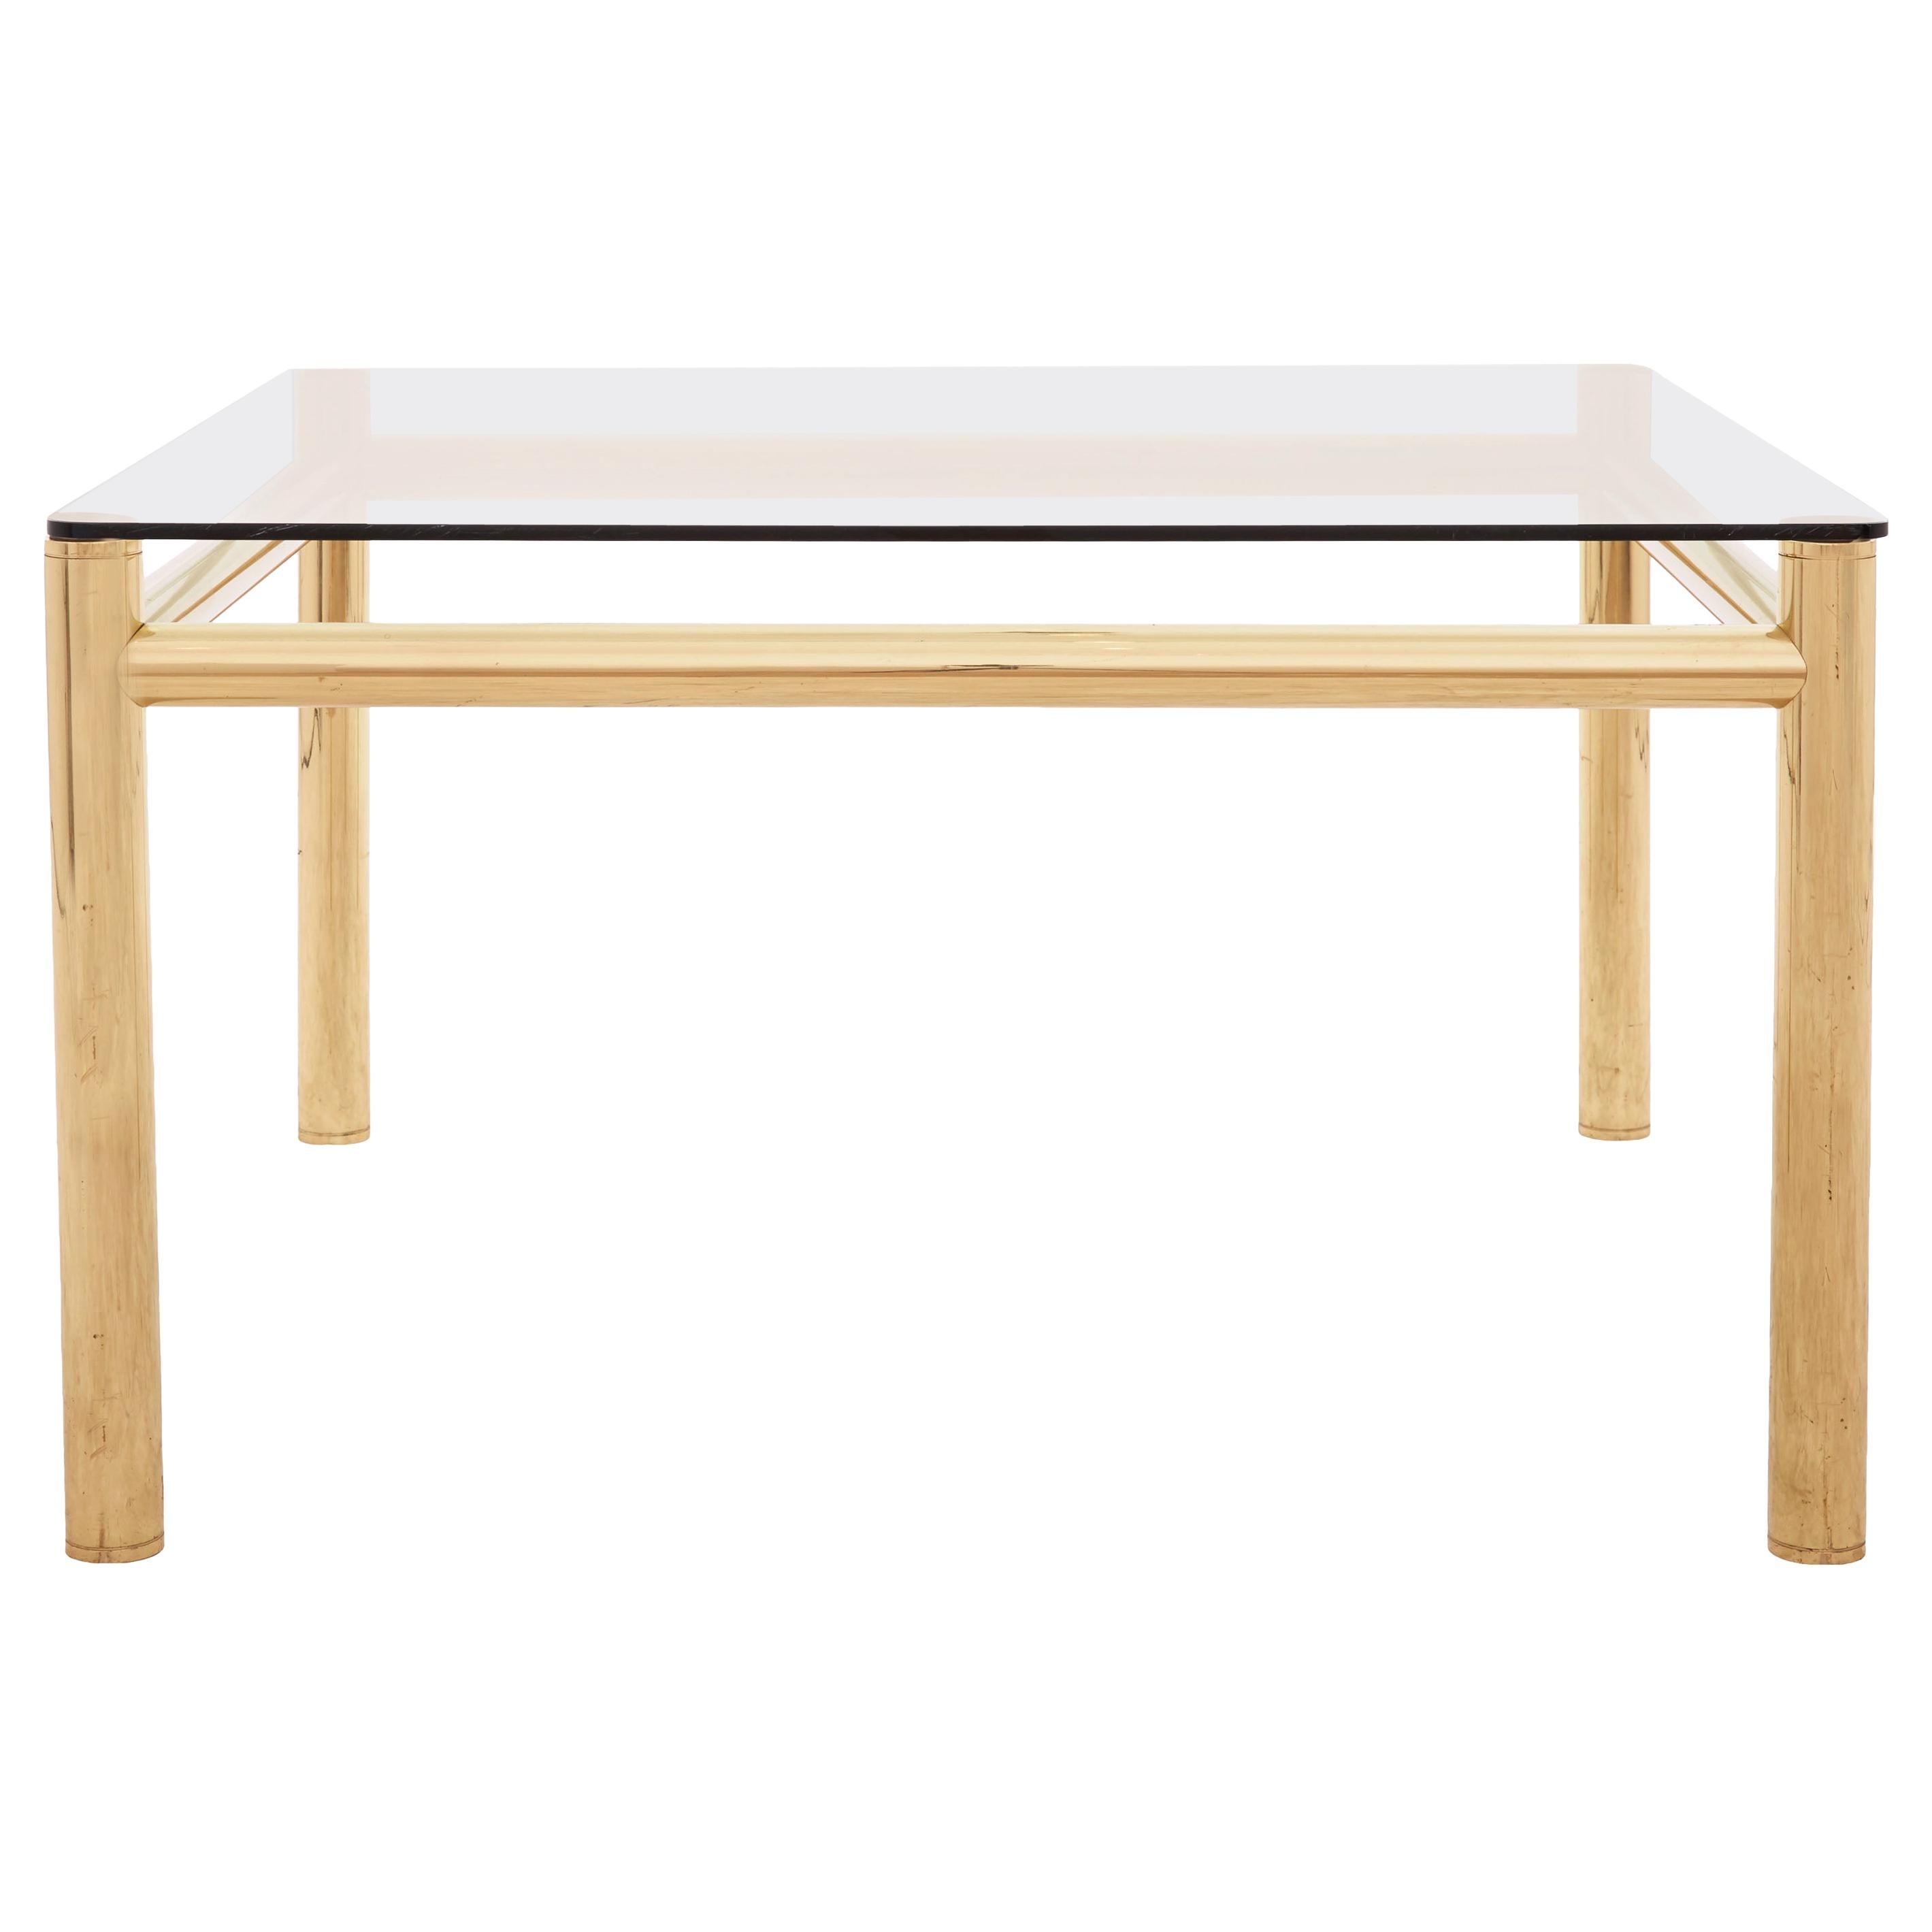 Midcentury Square Brass Dining Table with Leather Pad Detail For Sale